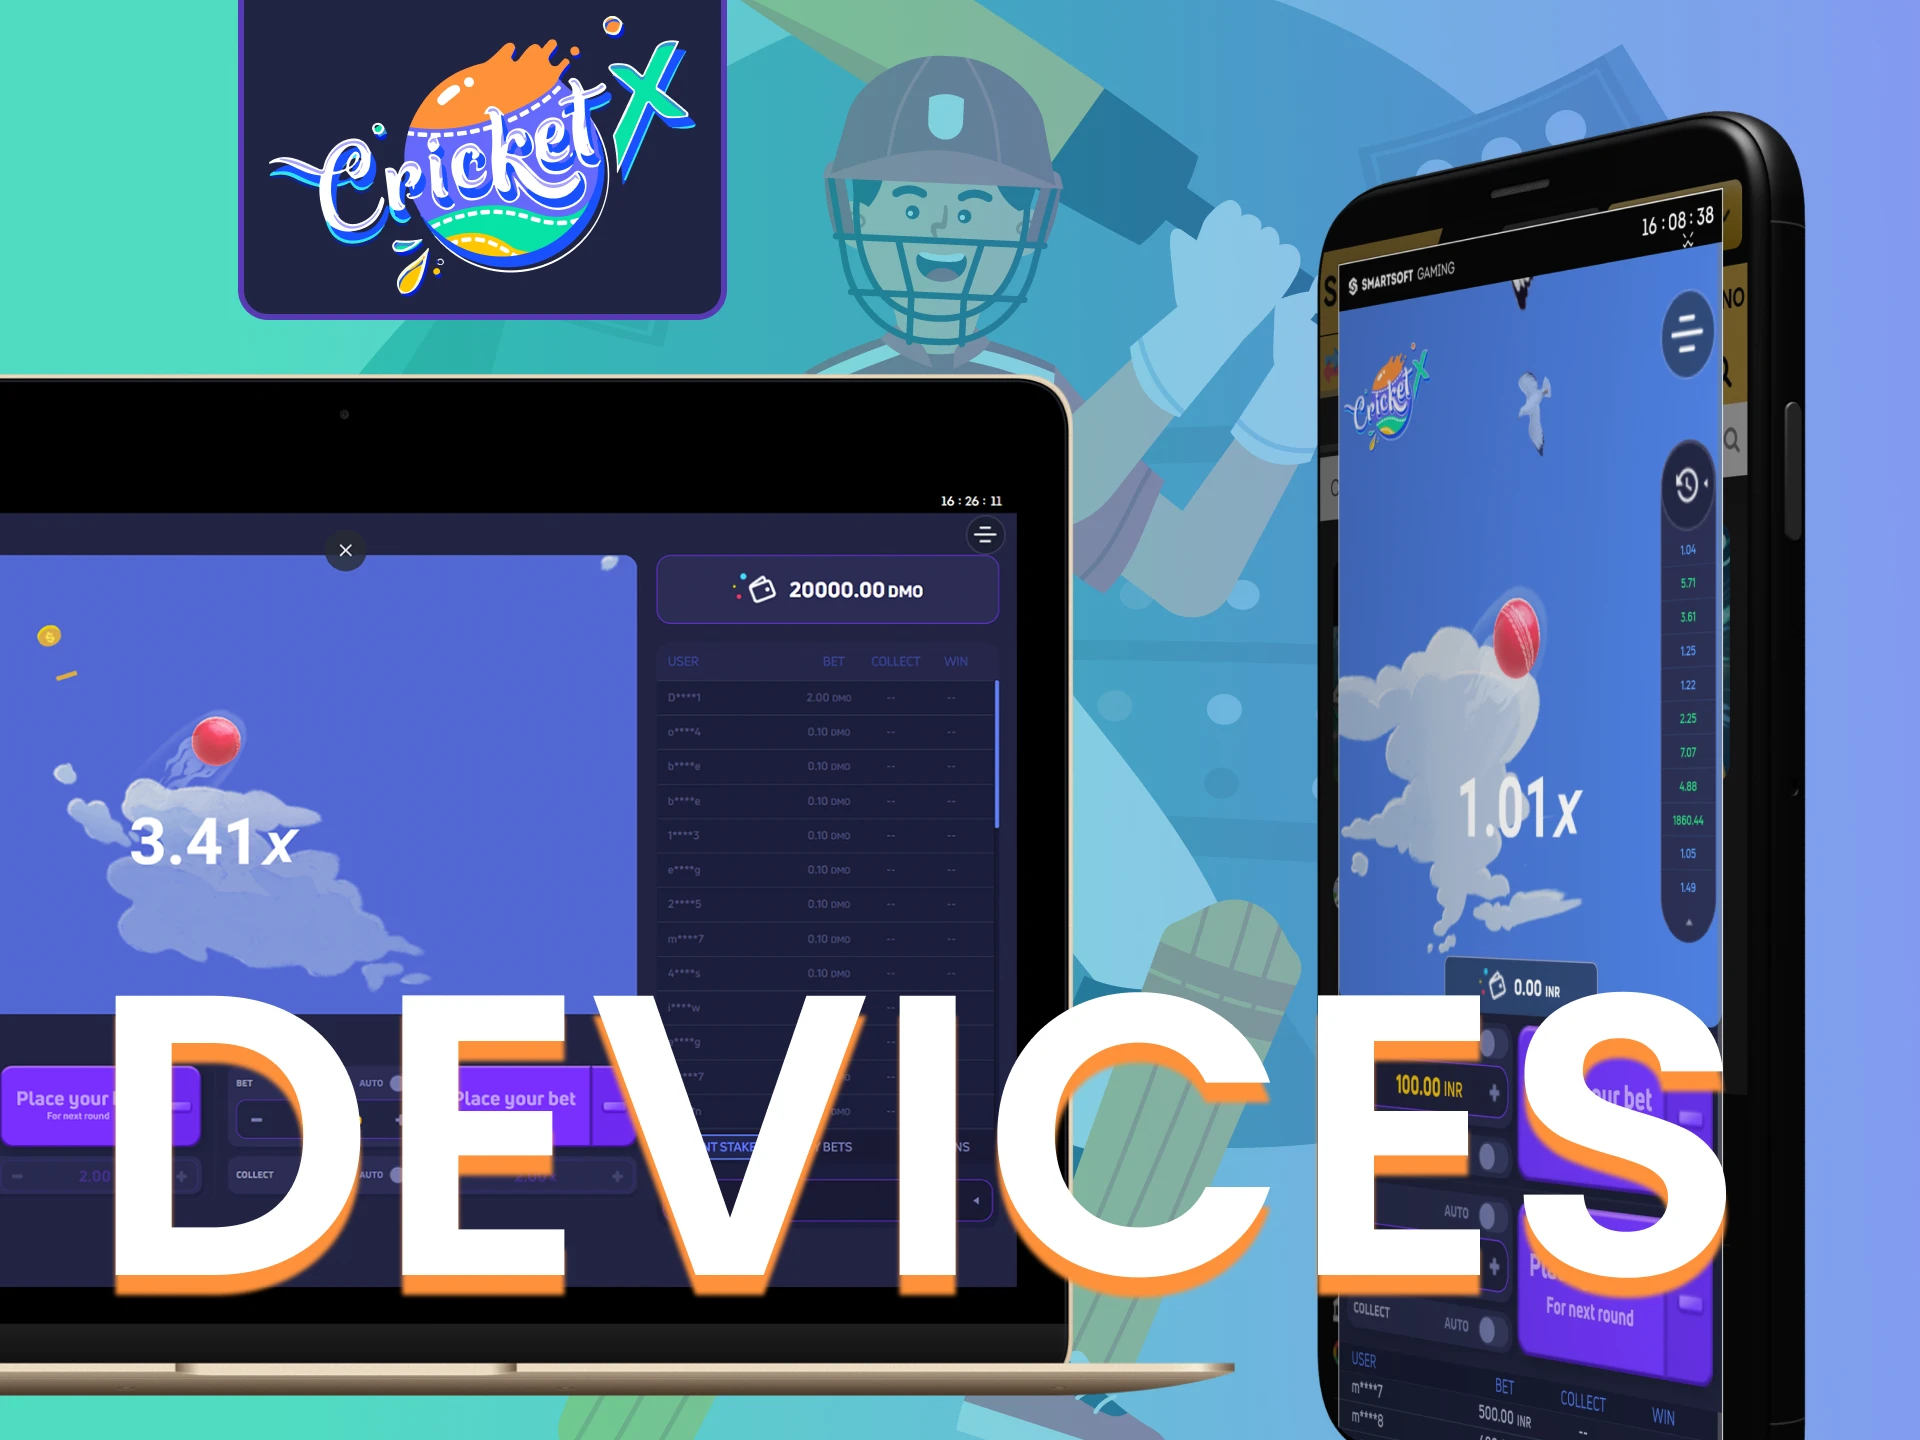 Find out on which devices you can play Cricket X.